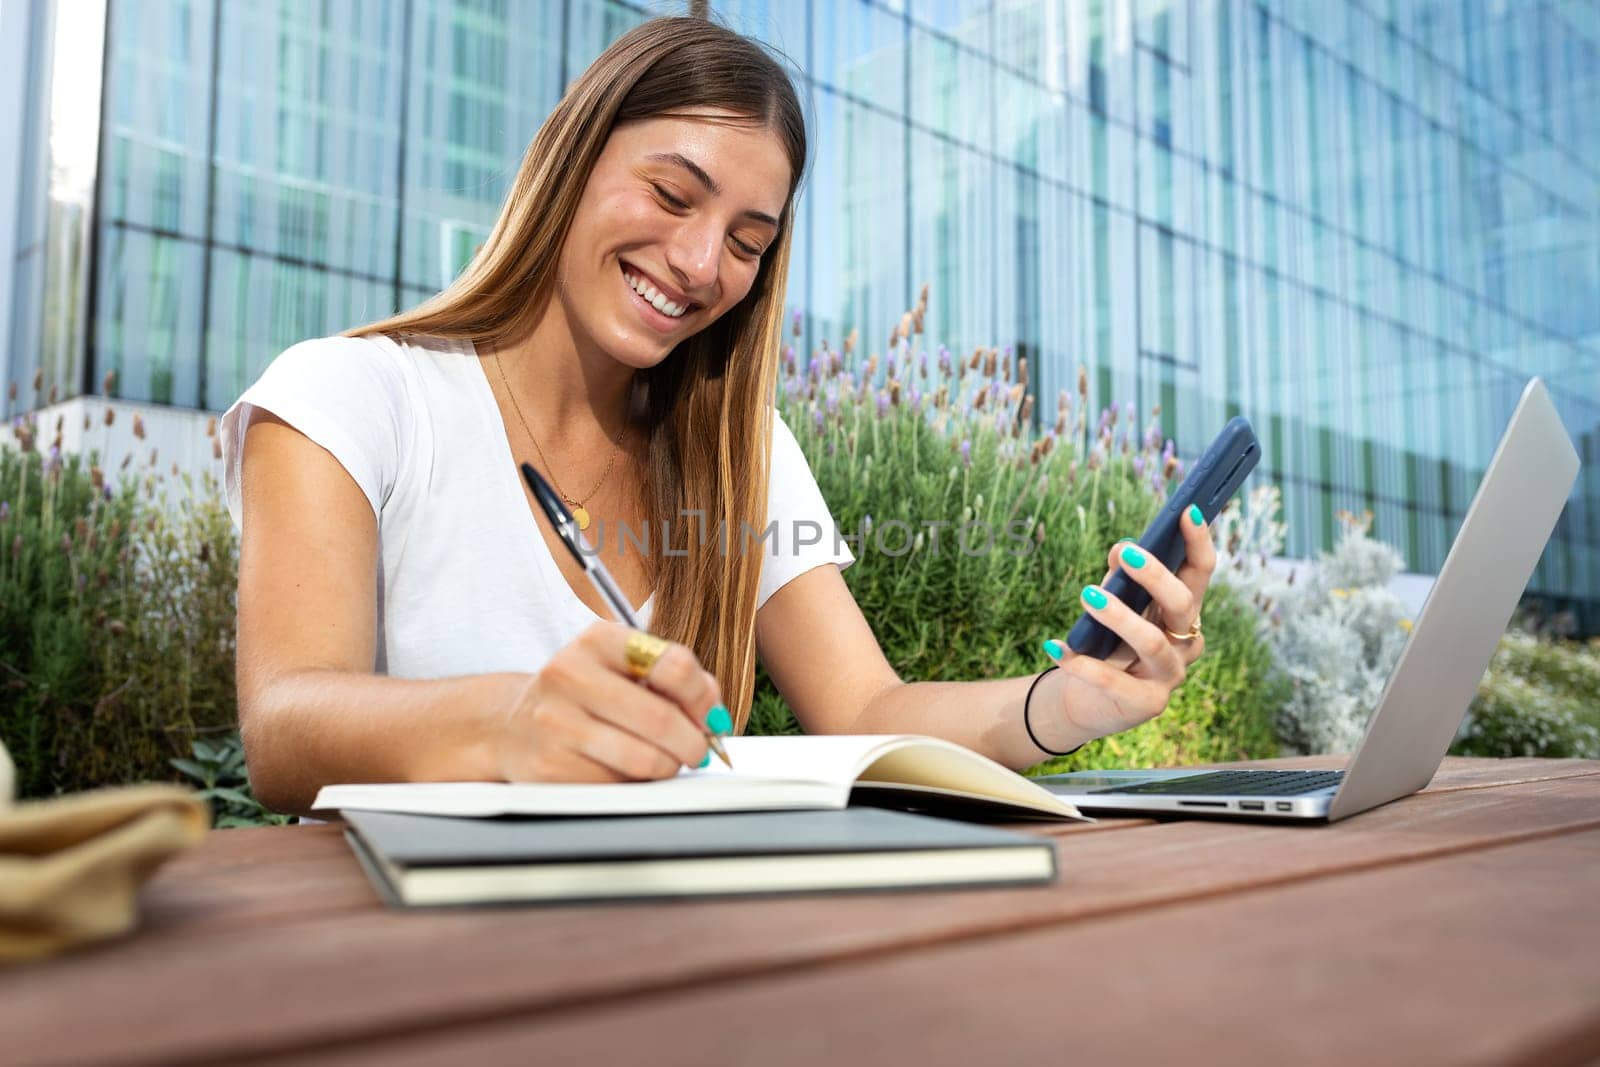 Young happy blonde female college student using phone and laptop to study, taking notes on notebook. University, college concept.